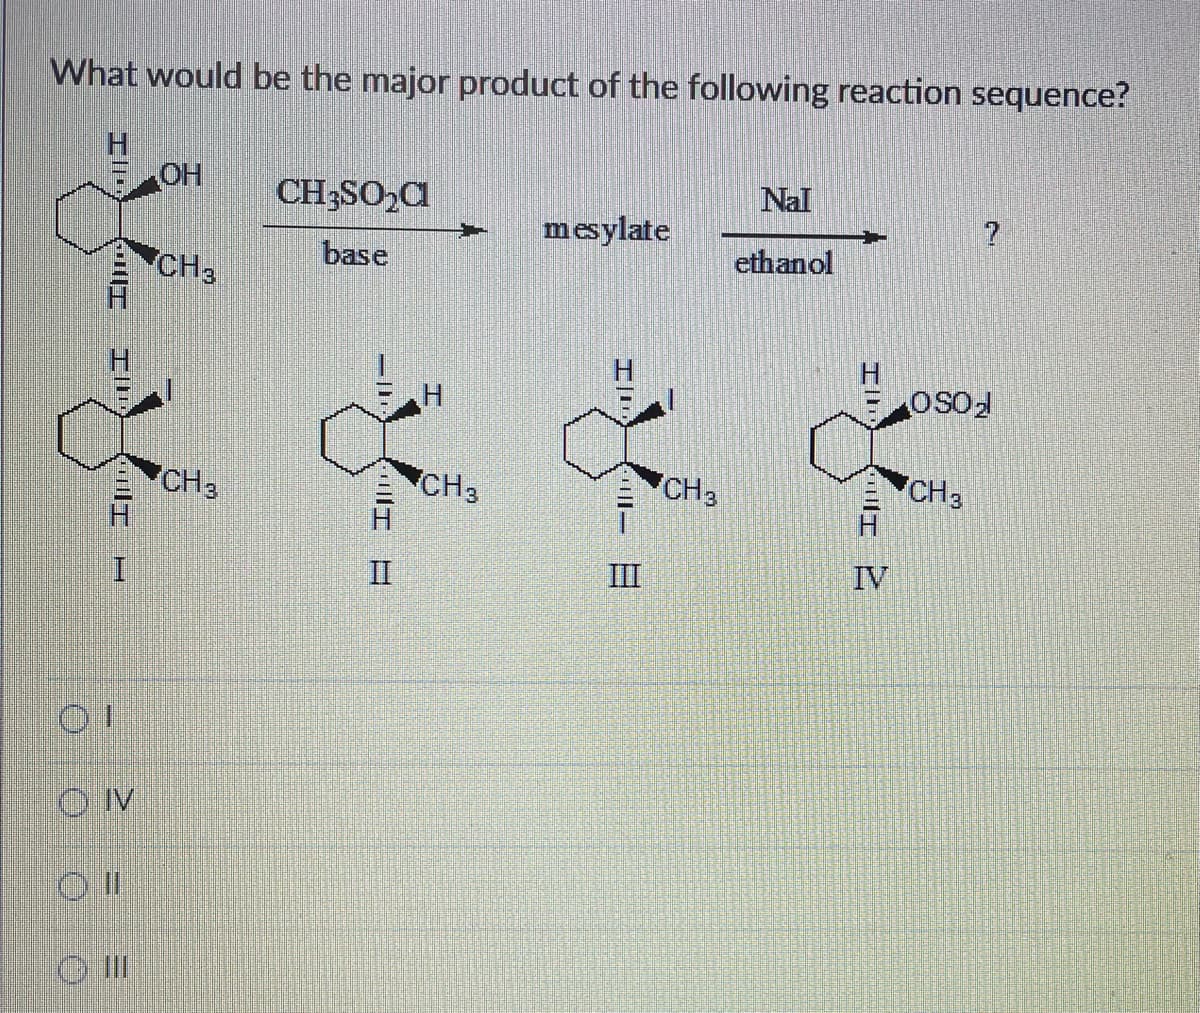 What would be the major product of the following reaction sequence?
0 0 0 0
IC
H
ON
GIII
OH
CH3
CH3
CH3SO₂C
base
CH3
mesylate
71-
III
CH3
Nal
ethanol
7
IL
I 2
?
OSO₂
CH3